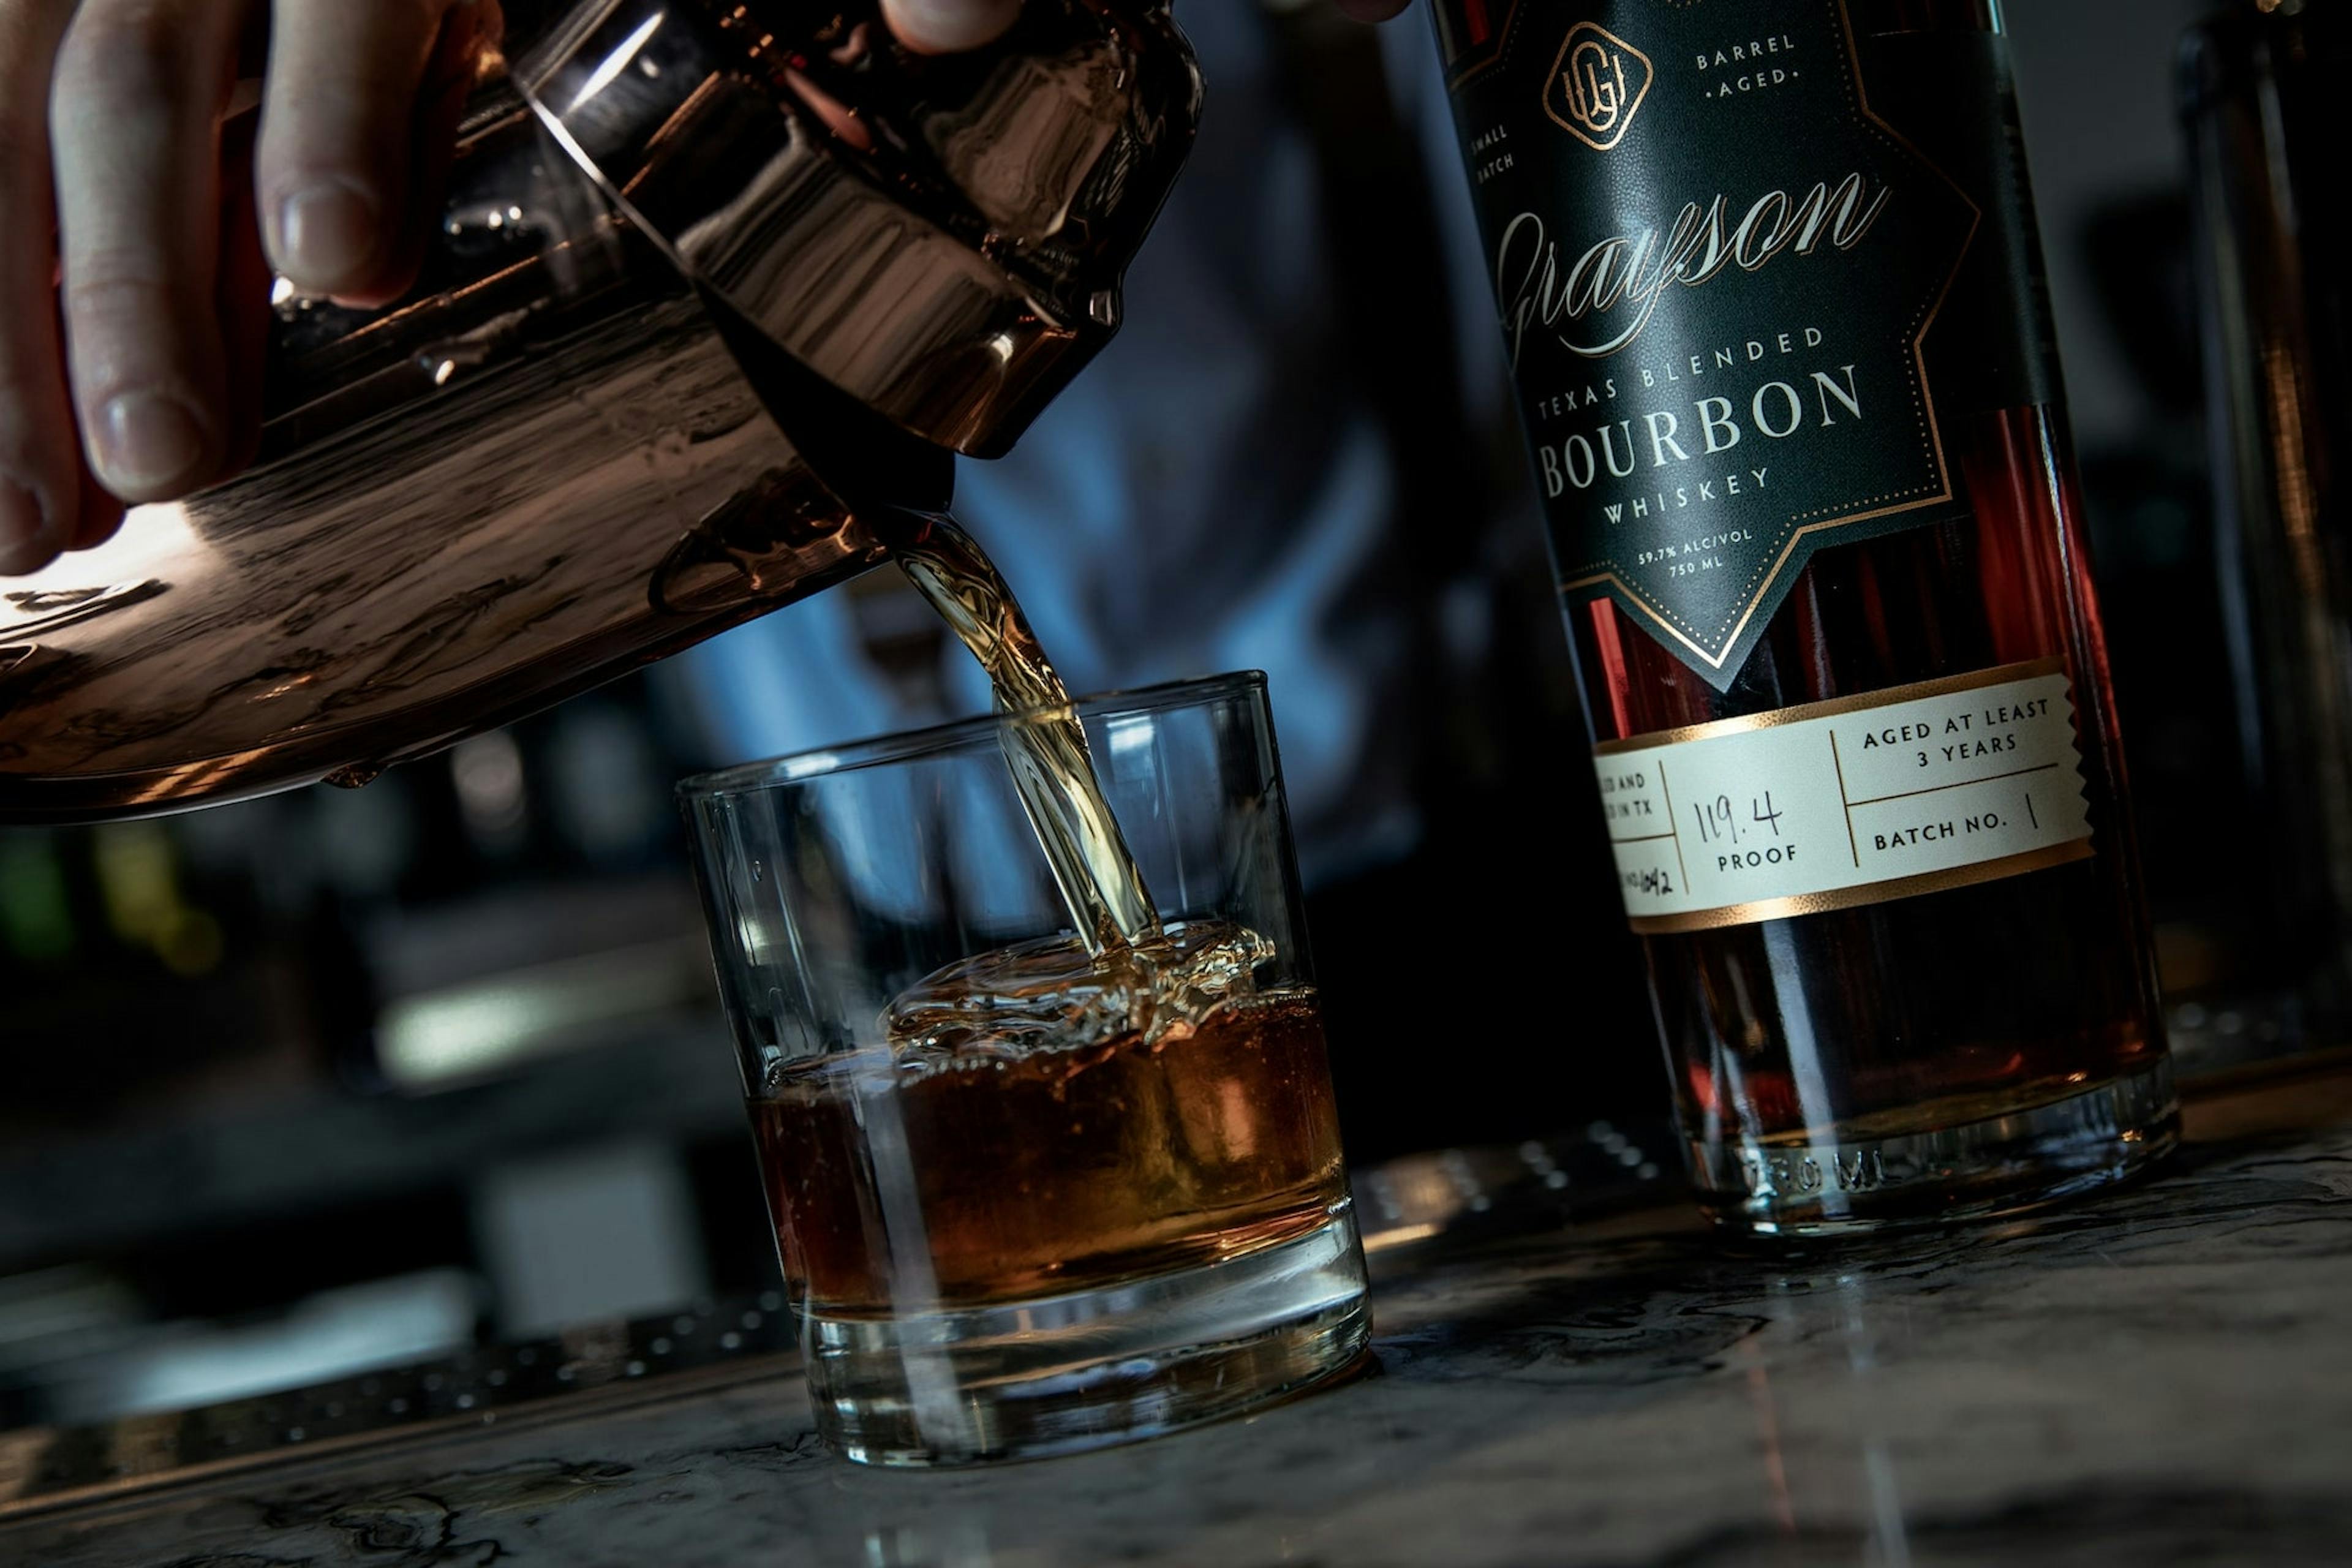 Grayson Bourbon being poured into a whiskey glass by a bartender